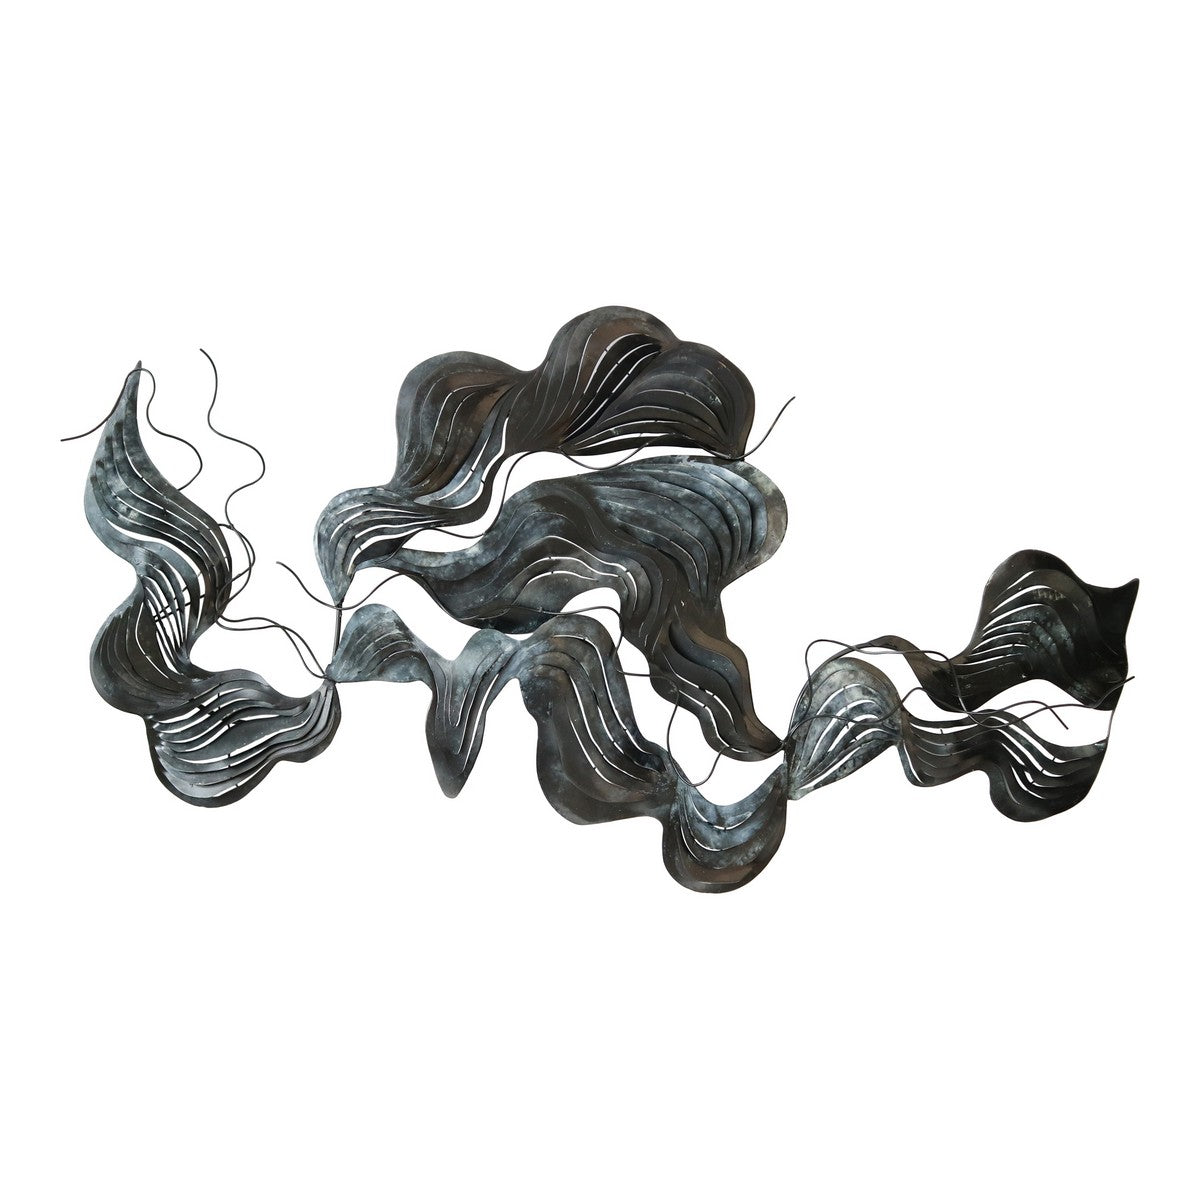 Moe's Home Collection Wind Storm Wall Décor - HZ-1029-02 - Moe's Home Collection - Art - Minimal And Modern - 1